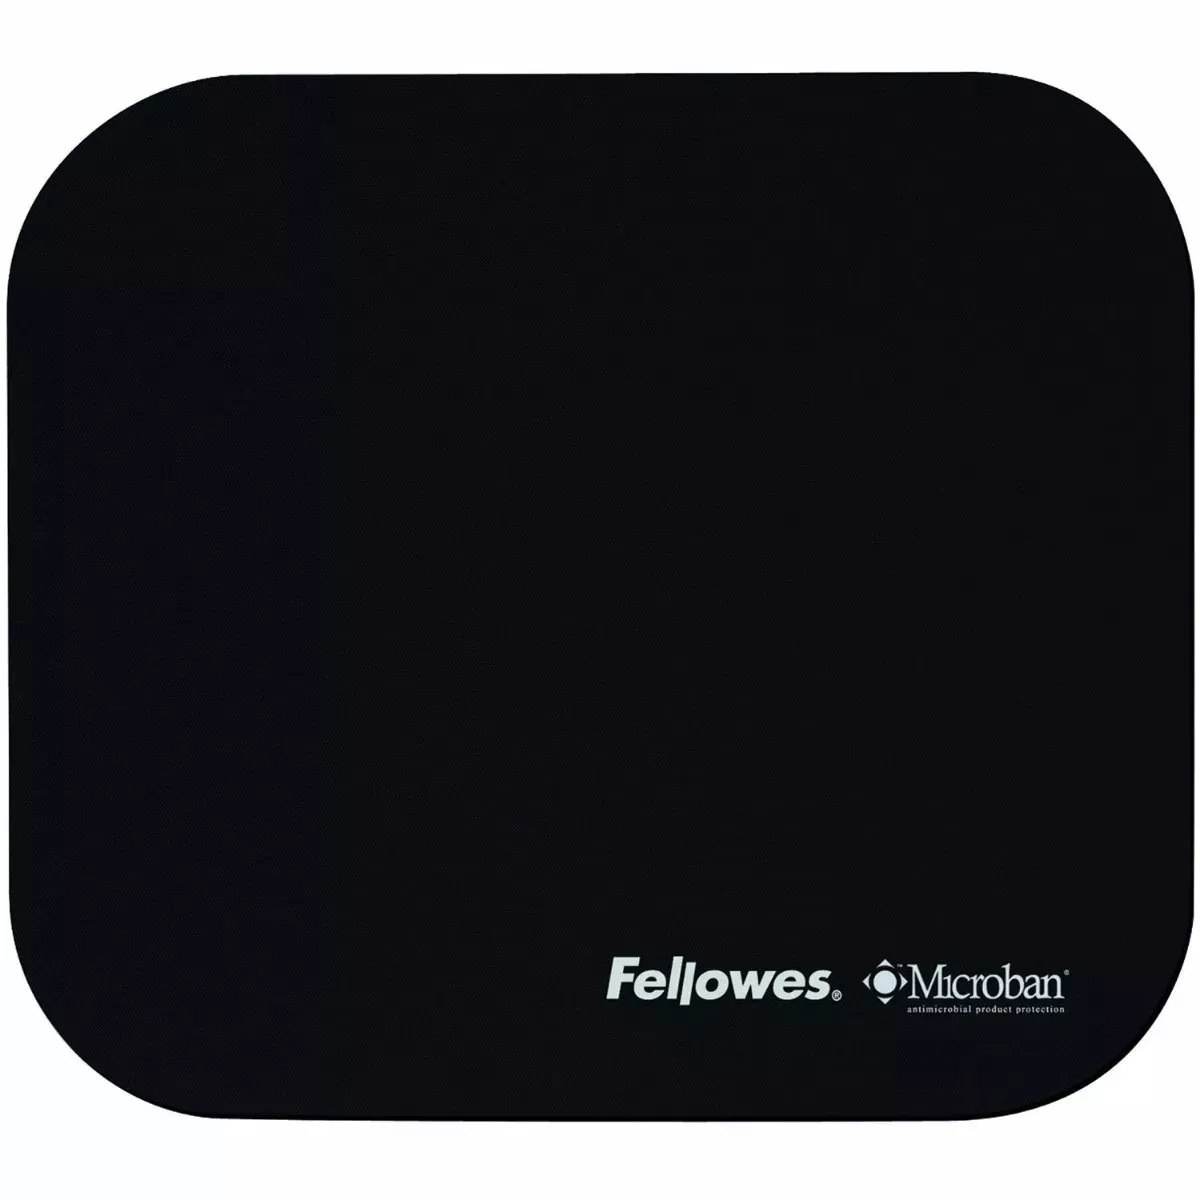 59339 FELLOWES                                                     | MOUSE PAD FELLOWES NEGRO                                                                                                                                                                                                                                  